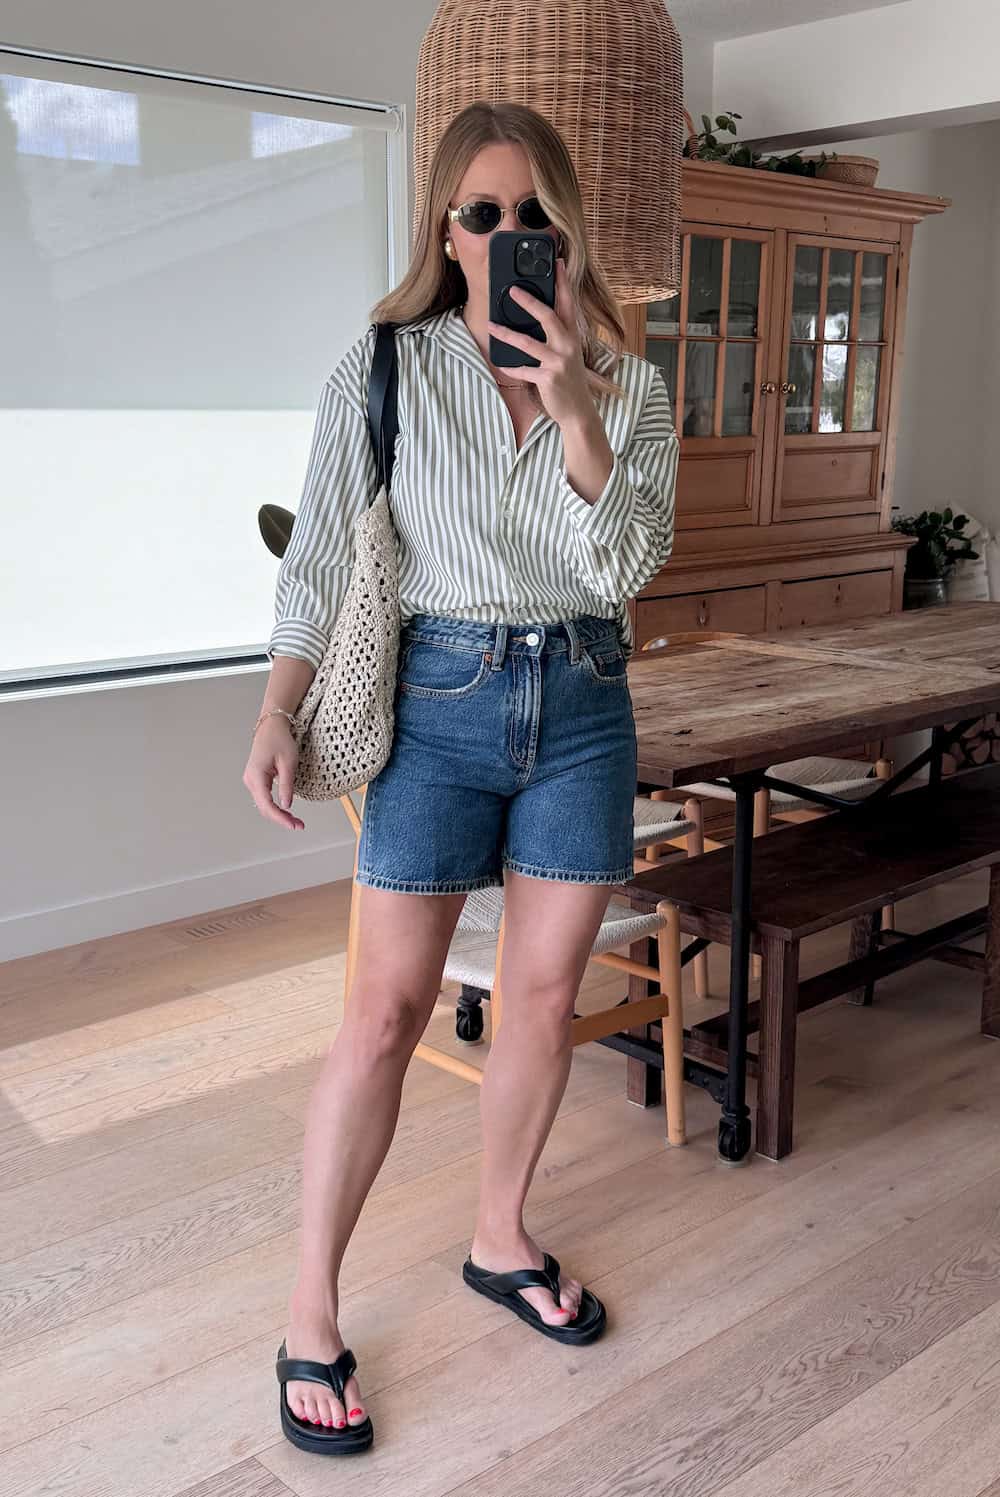 Christal wearing denim shorts with a green and white striped button down and sandals.